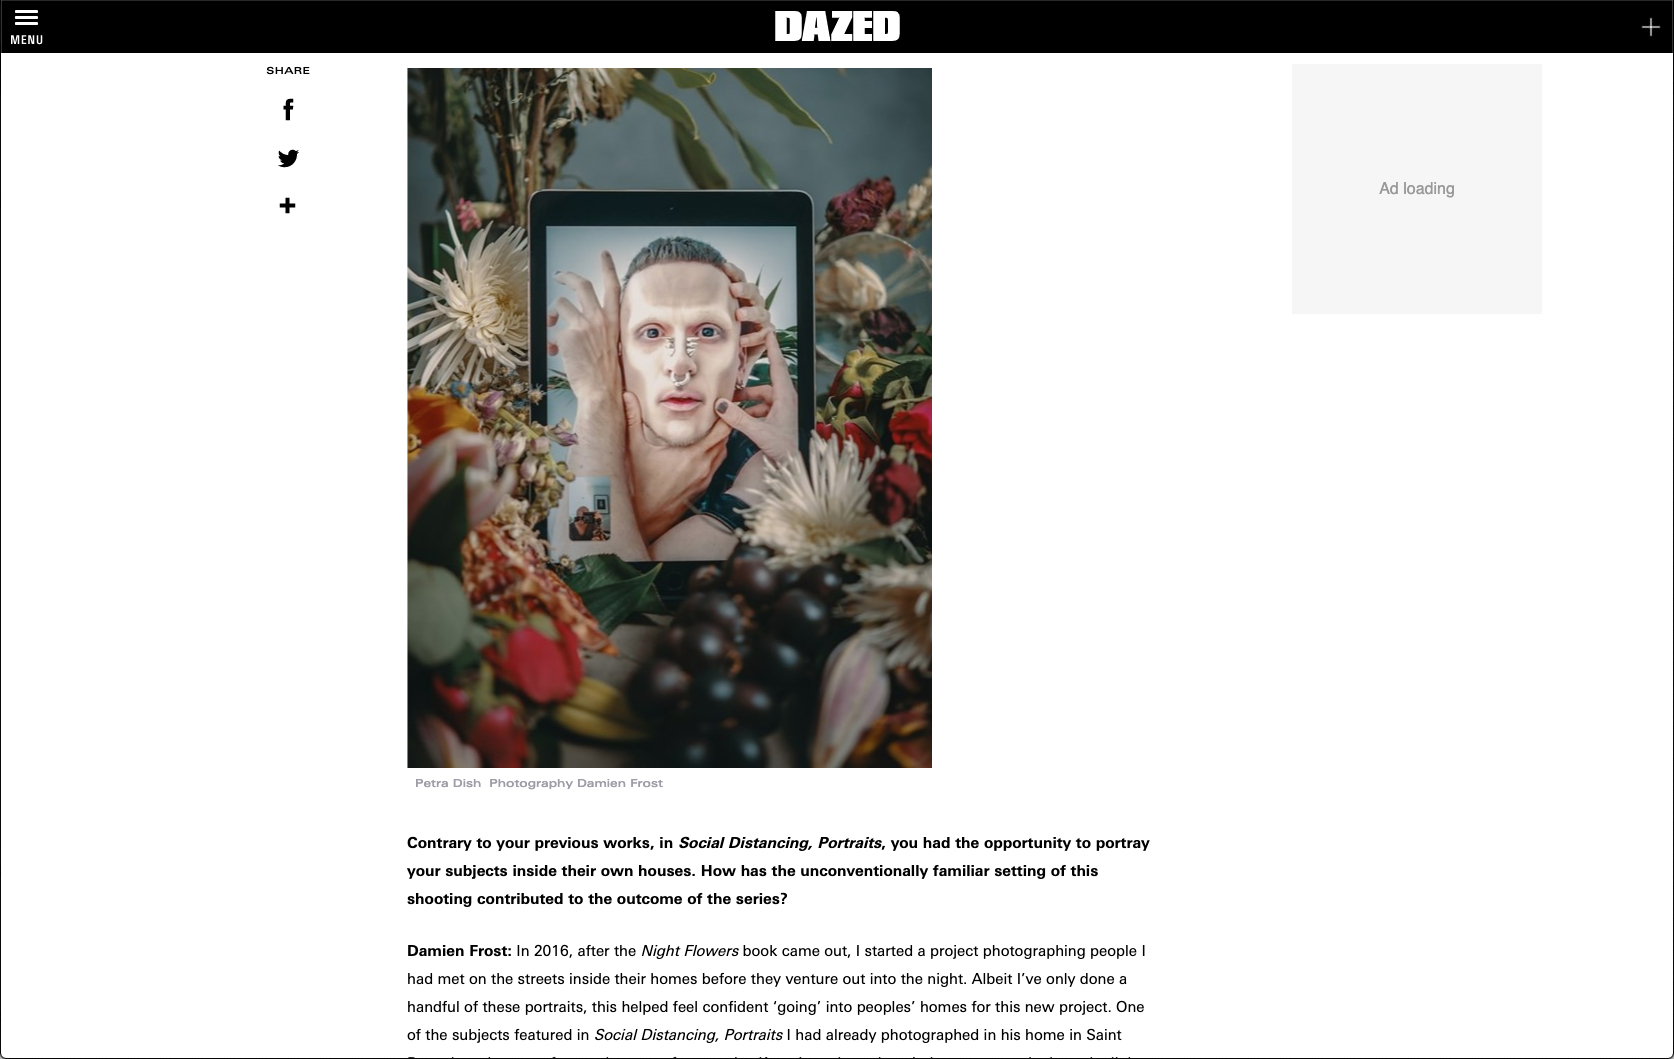 Dazed and Confused interview with Damien Frost